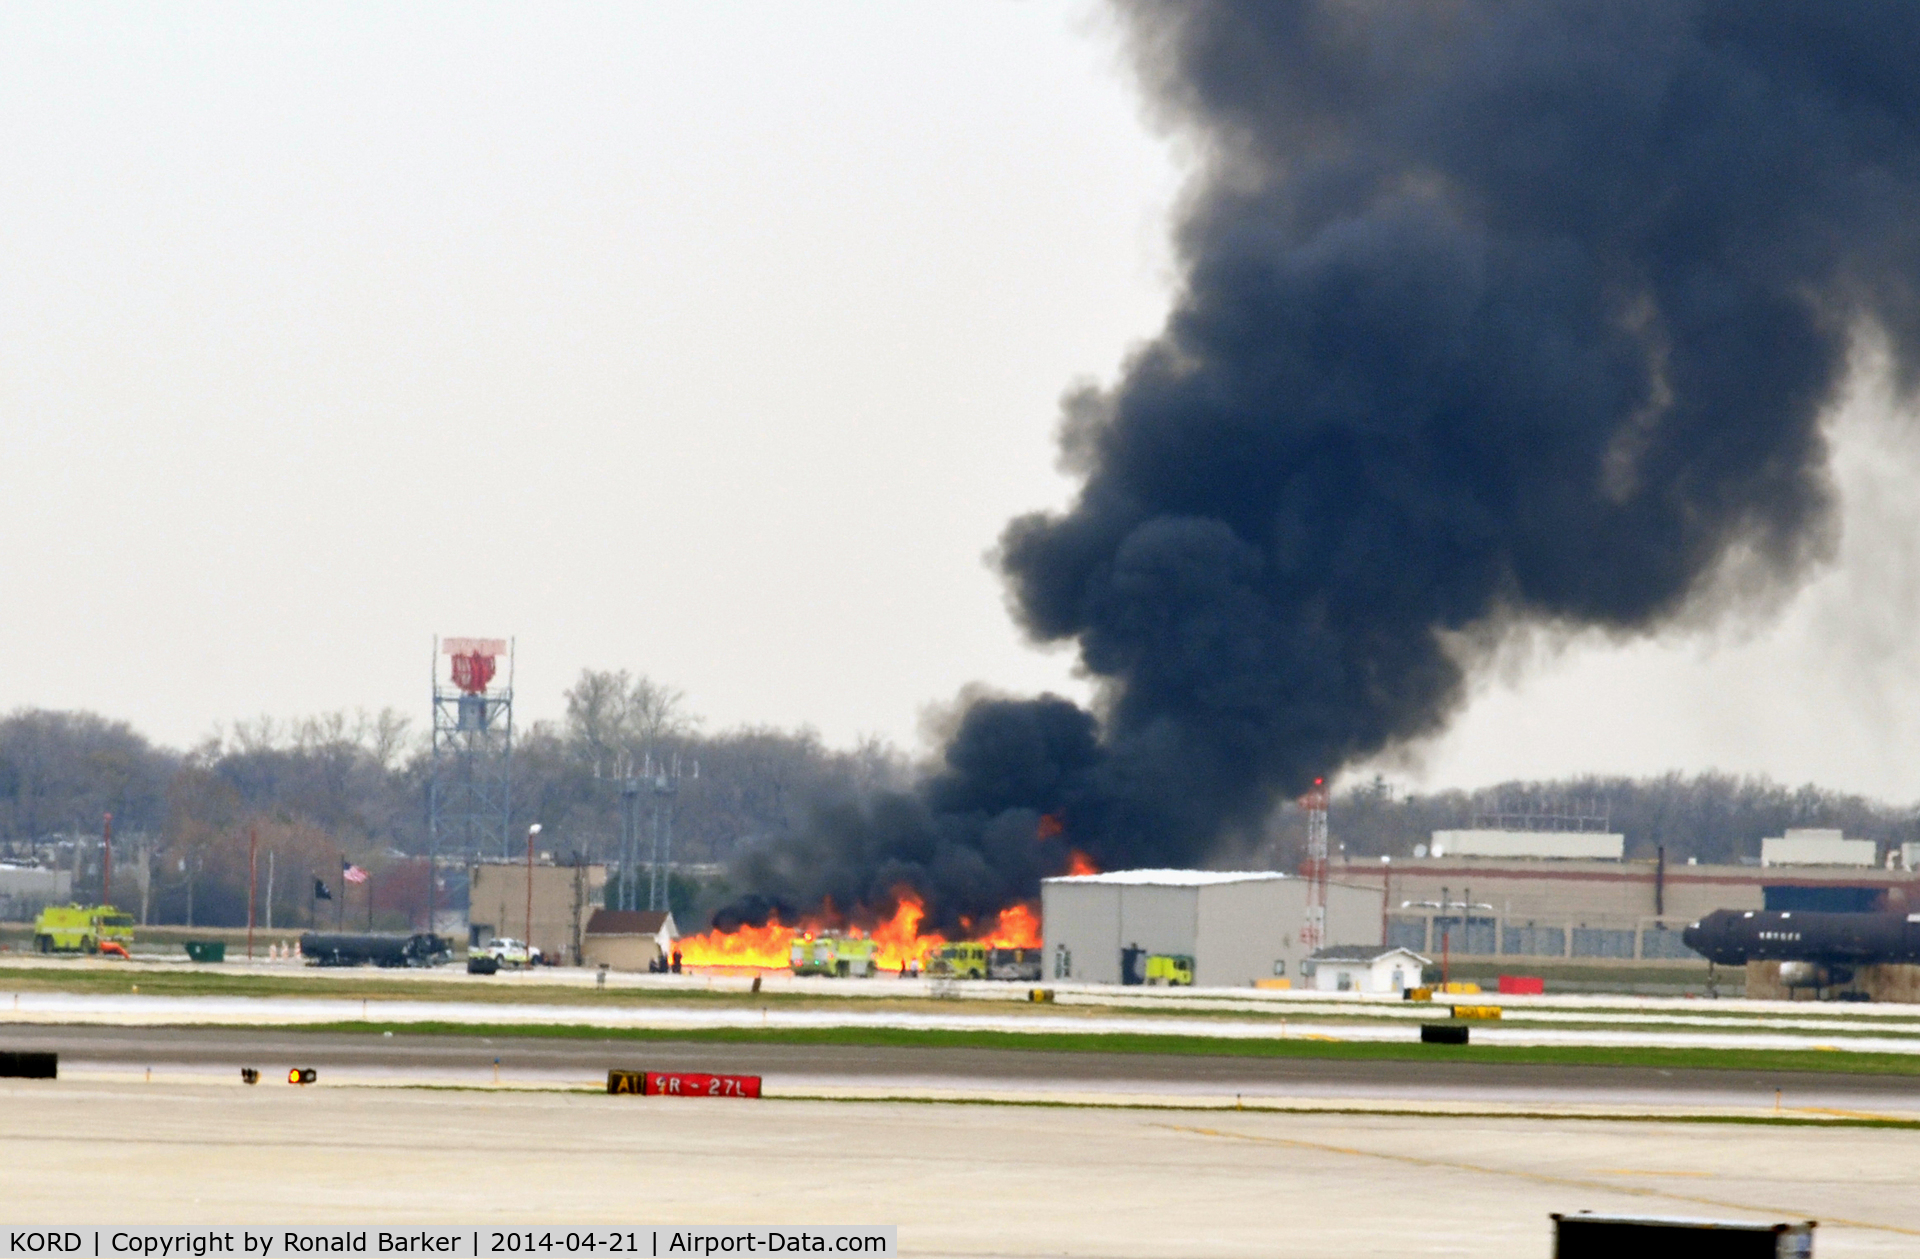 Chicago O'hare International Airport (ORD) - Fire department training O'Hare